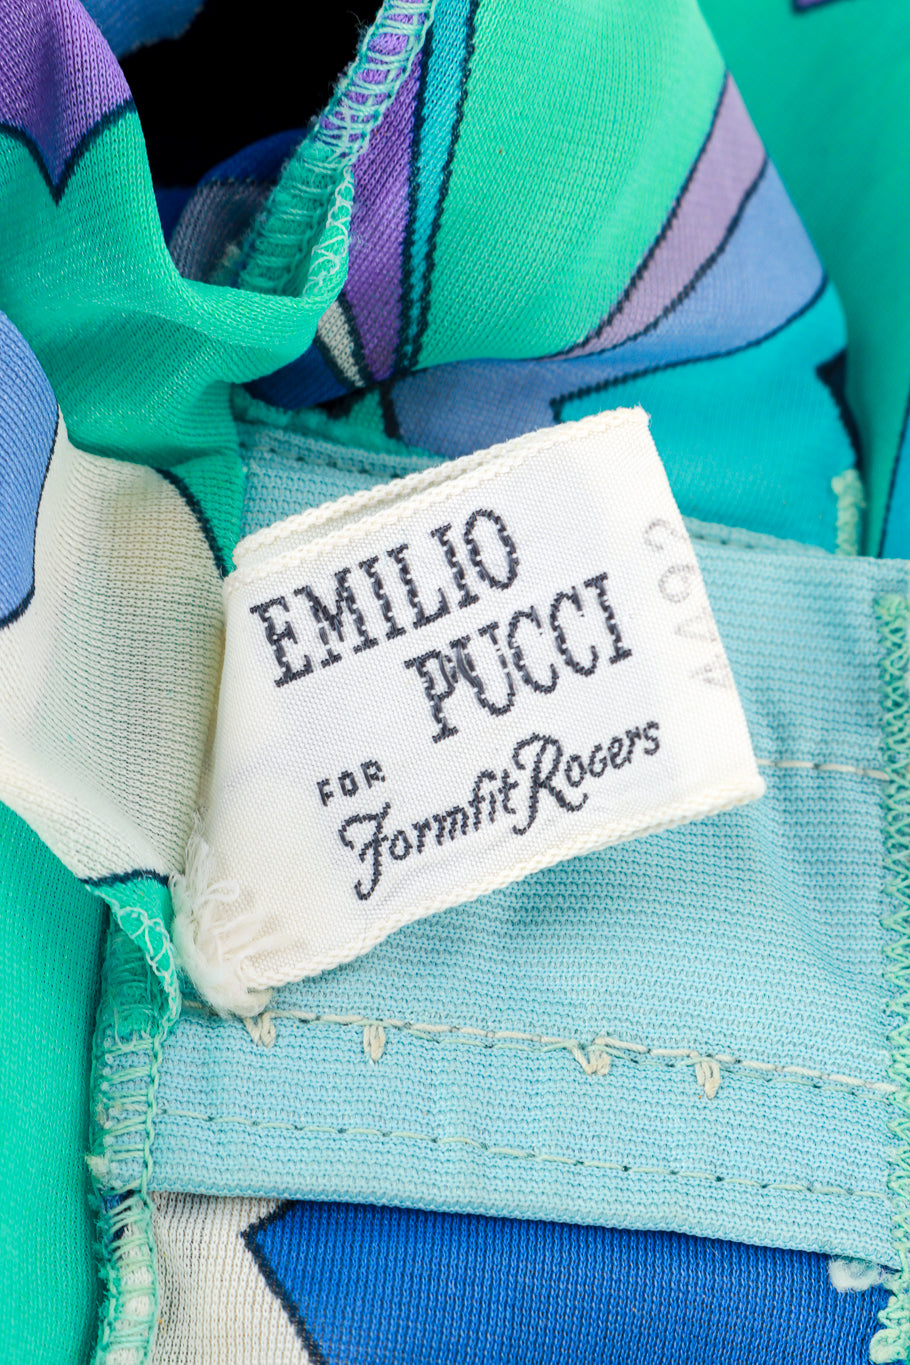 Vintage Emilio Pucci for Formfit Rogers teal purple and white geo chemise slip dress close up detail of the Pucci label flat lay @Recess LA